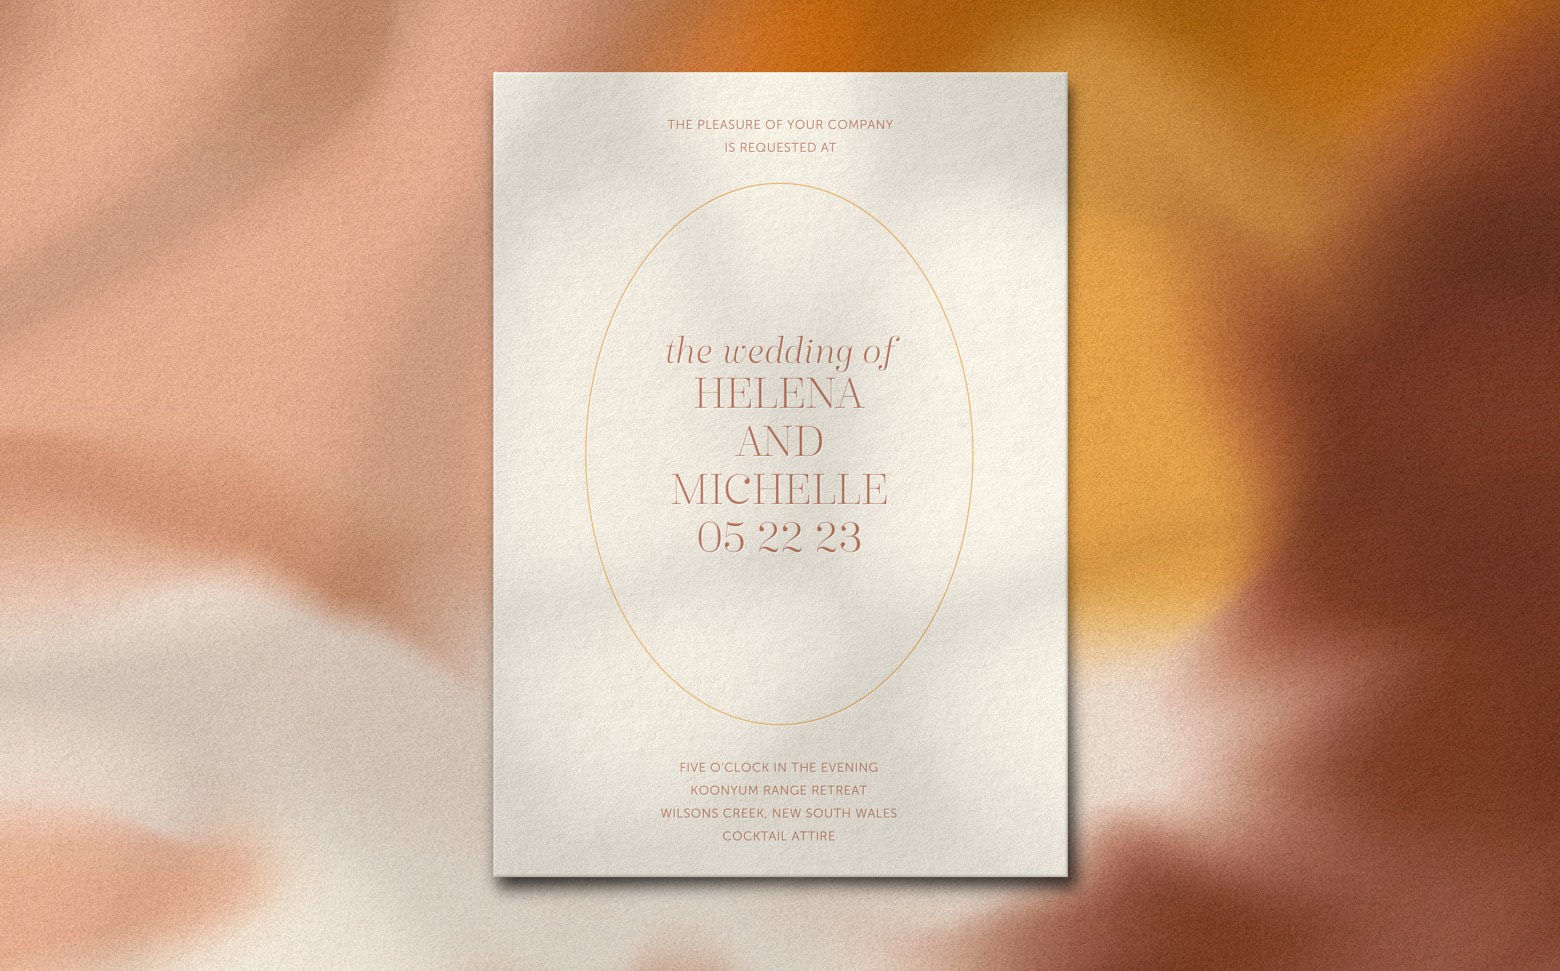 A cream colored wedding invitation with a tie-dye background featuring shades of orange and pink